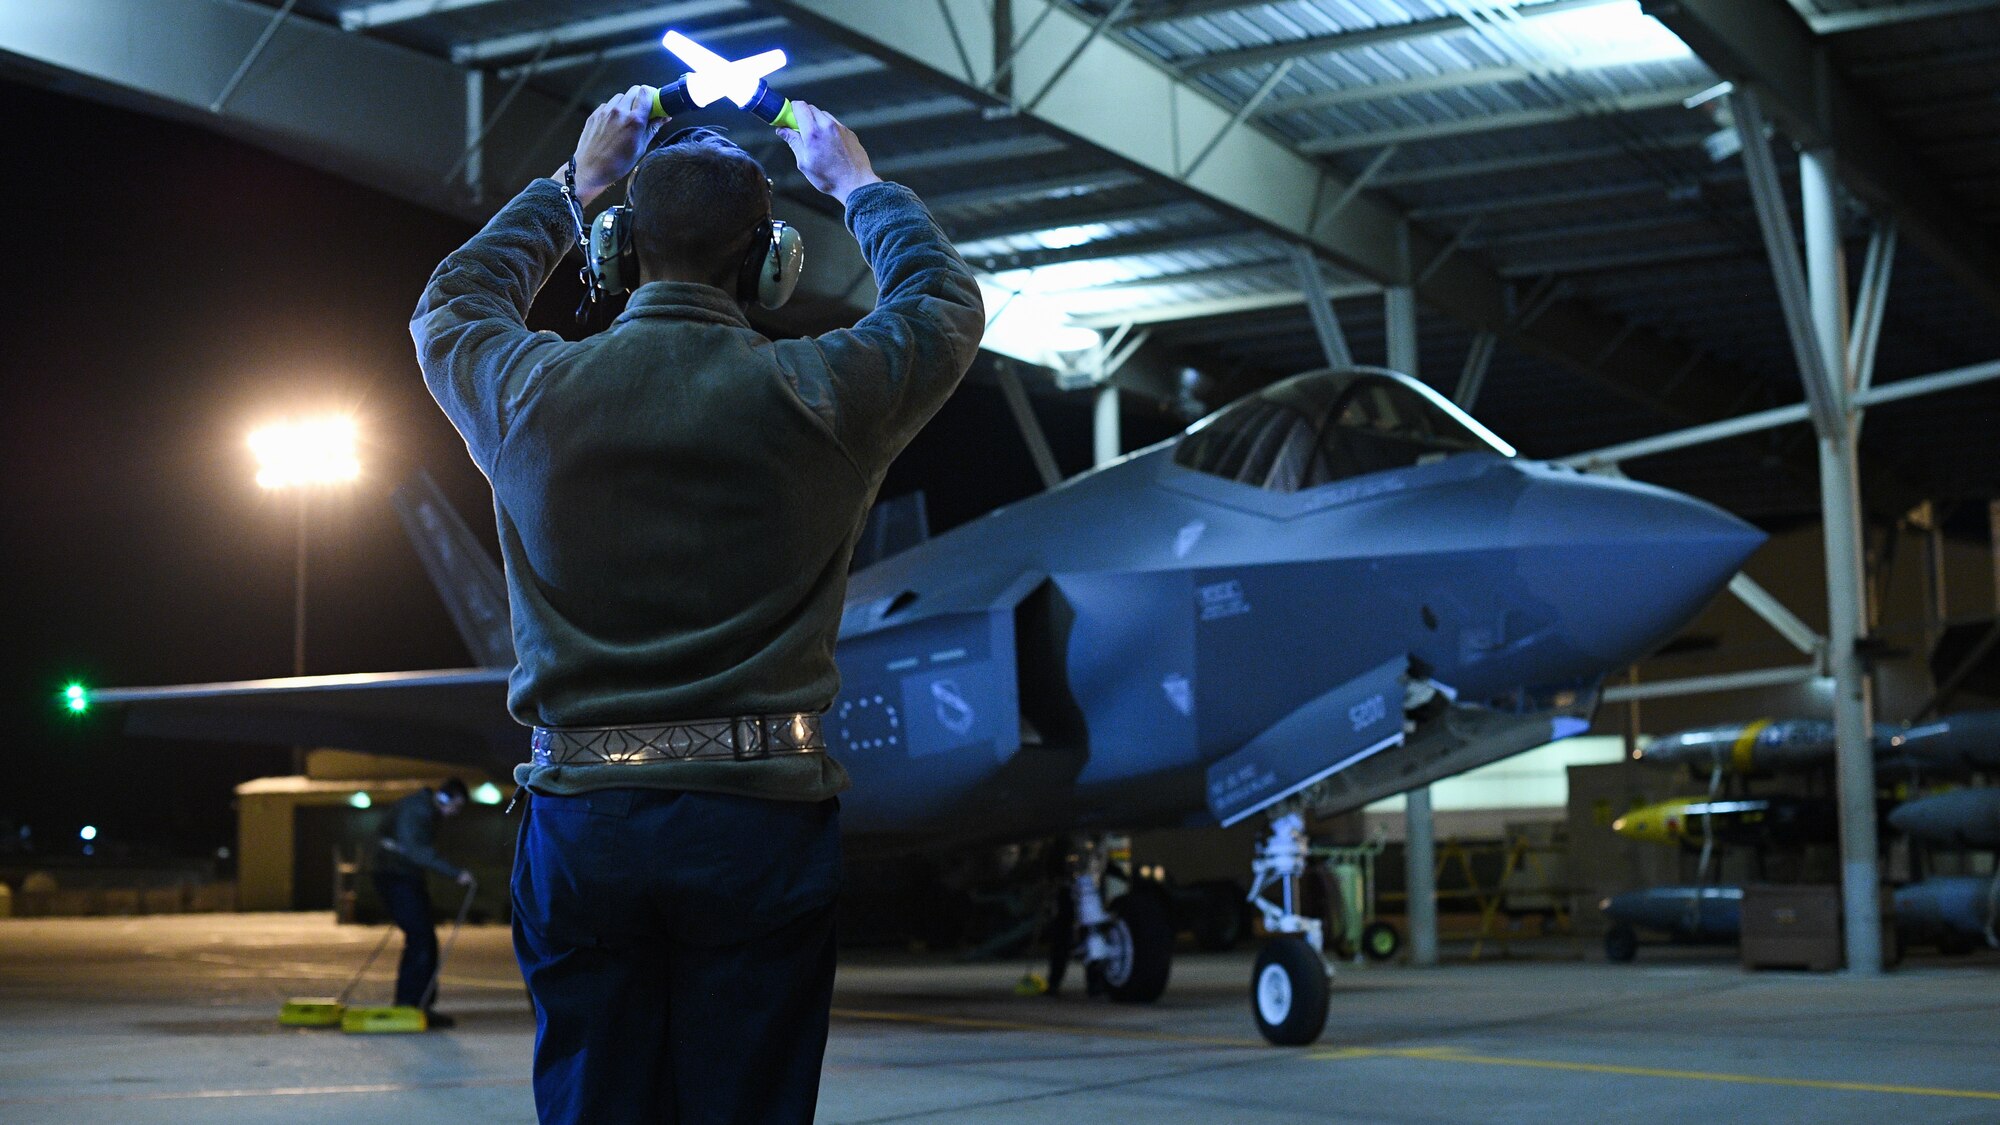 An Airman from the 388th Fighter Wing’s 421st Aircraft Maintenance Unit marshals an F-35A Lightning II during night flying operations at Hill Air Force Base, Utah, March 26, 2019. Night flying is required for pilots to sharpen their combat skills and maintainers work around the clock to prepare jets for flight, inspect them after flight, and get them ready for the next flying day. The 388th Fighter Wing is the Air Force’s first combat-coded F-35A wing. (U.S. Air Force photo by R. Nial Bradshaw)